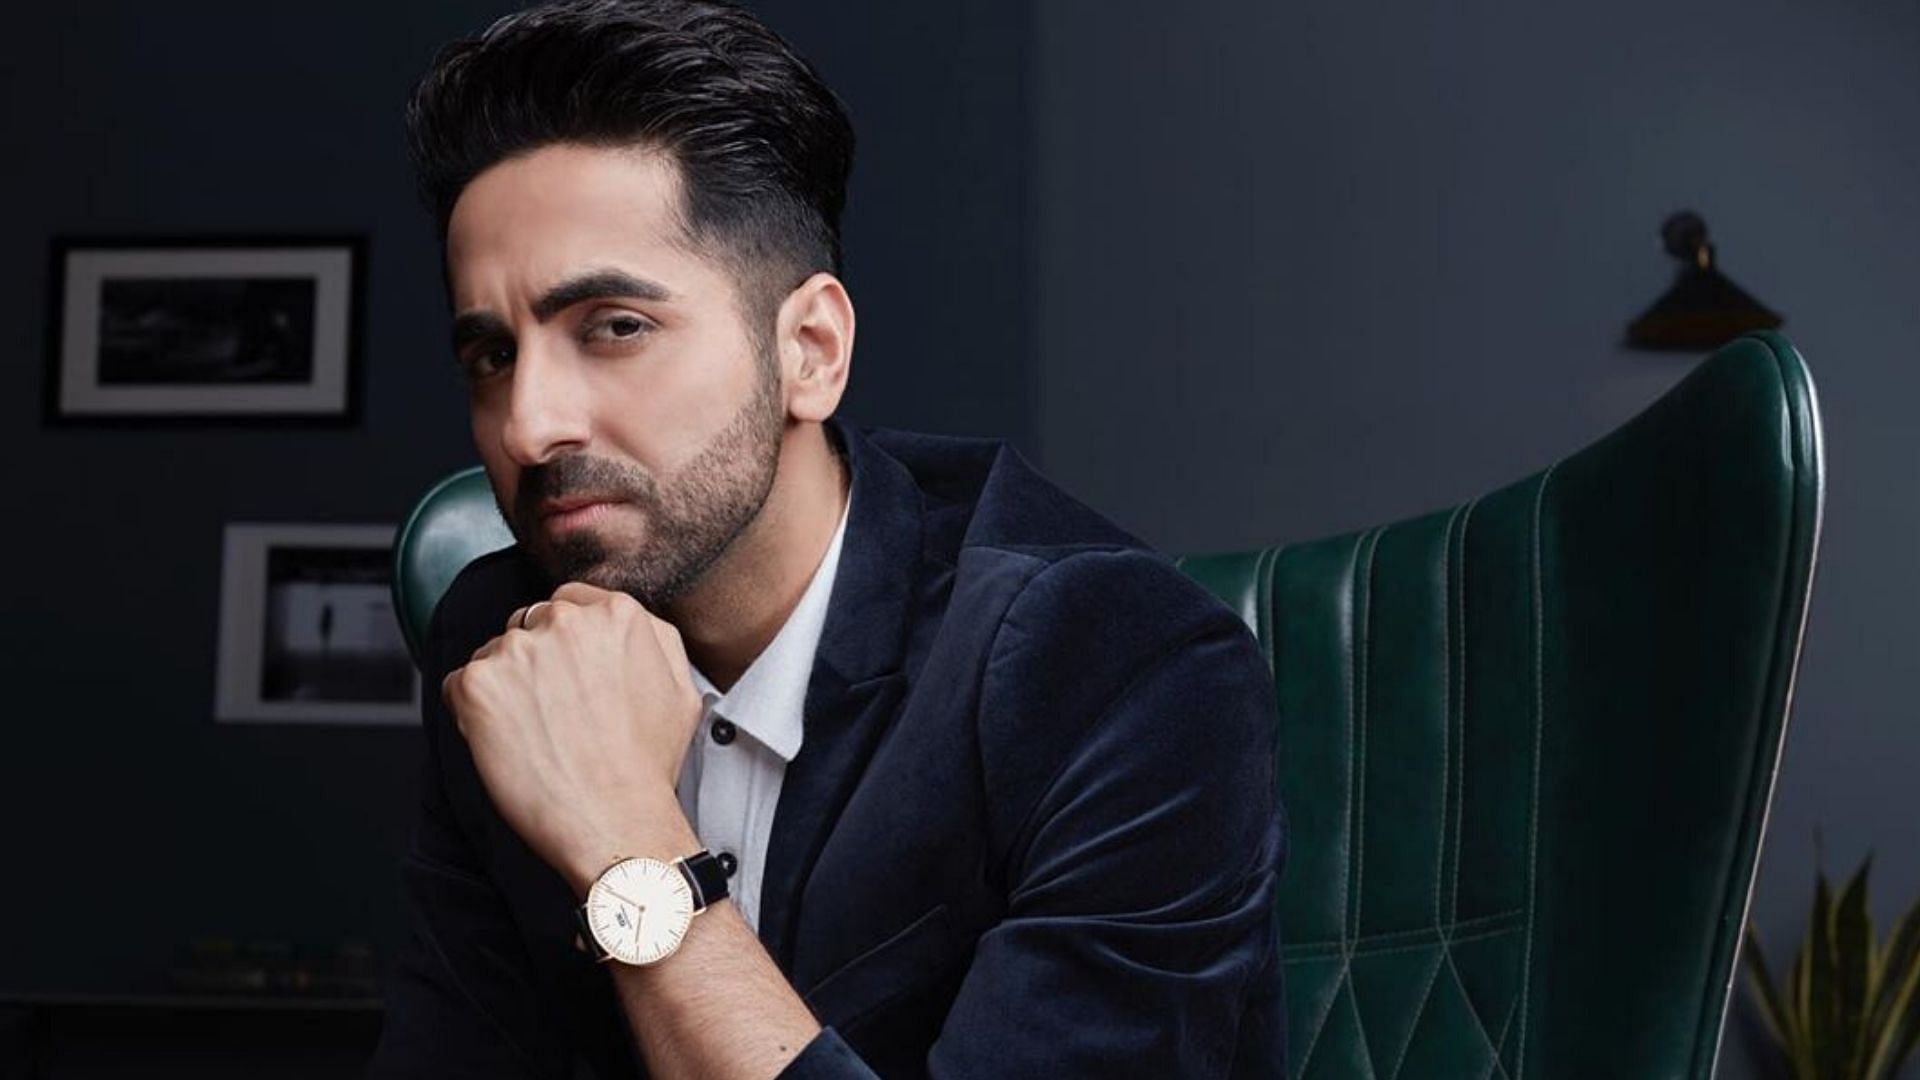 Ayushmann Khurrana admits he made an incorrect comment about same-sex marriages in India.